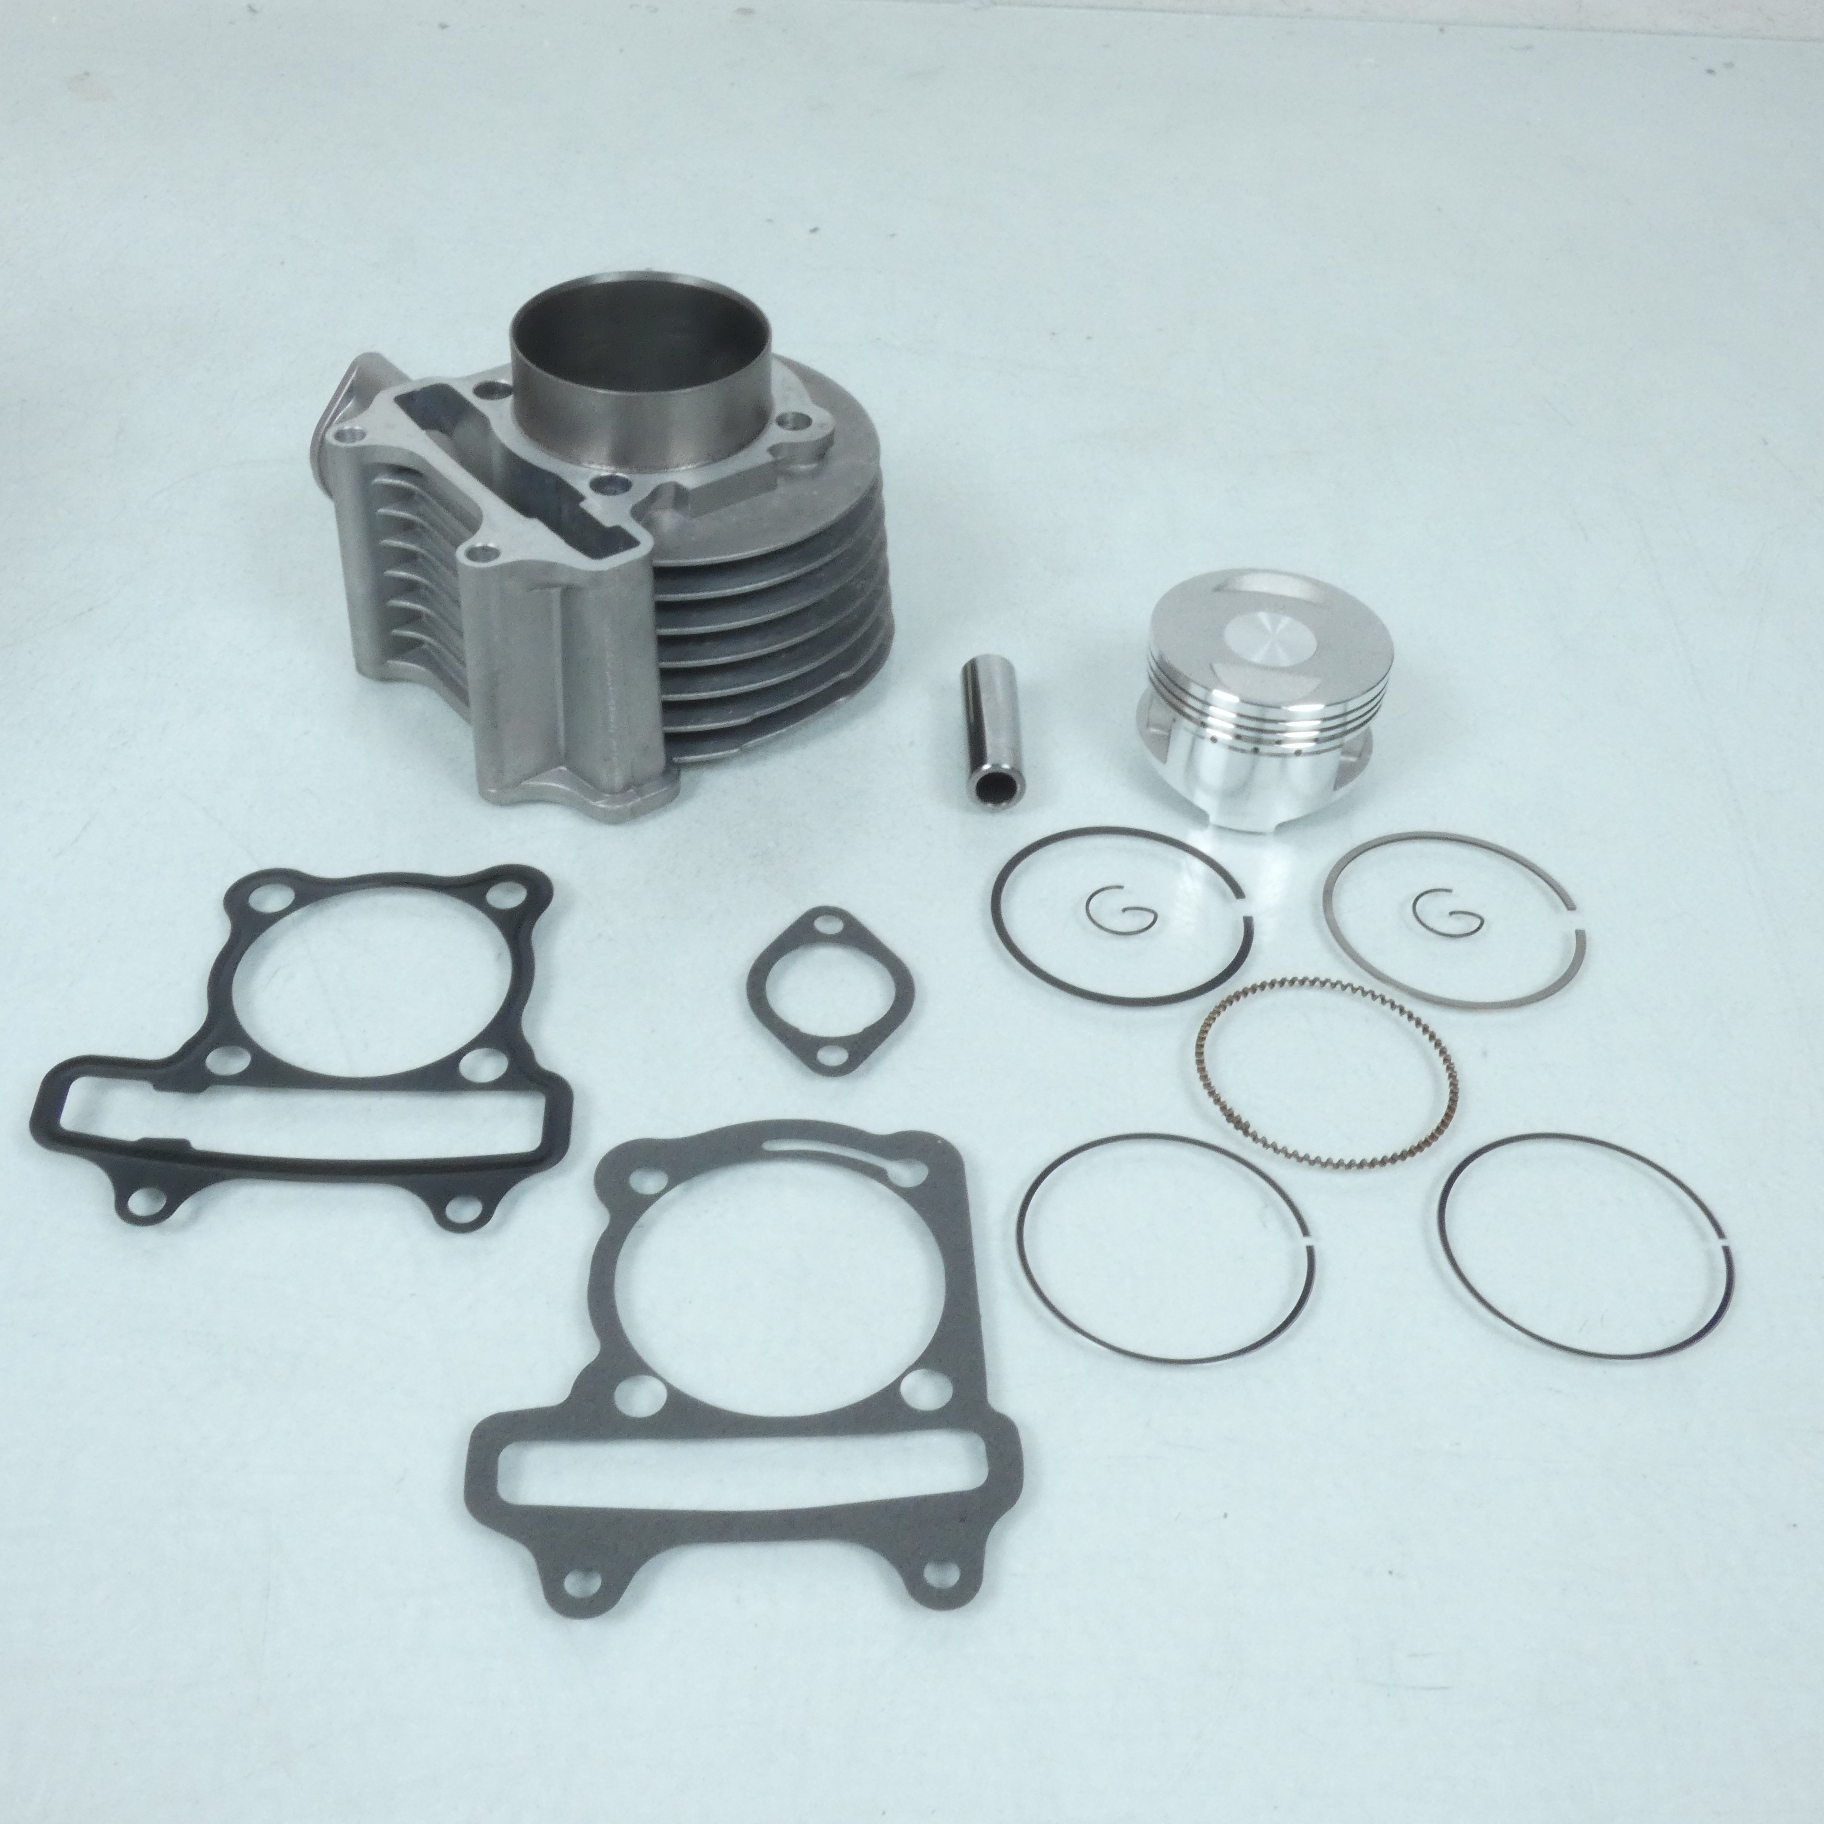 Kit Cylindre piston Ø61mm RMS Moto pour scooter Kymco 200 Agility Axe Ø15mm